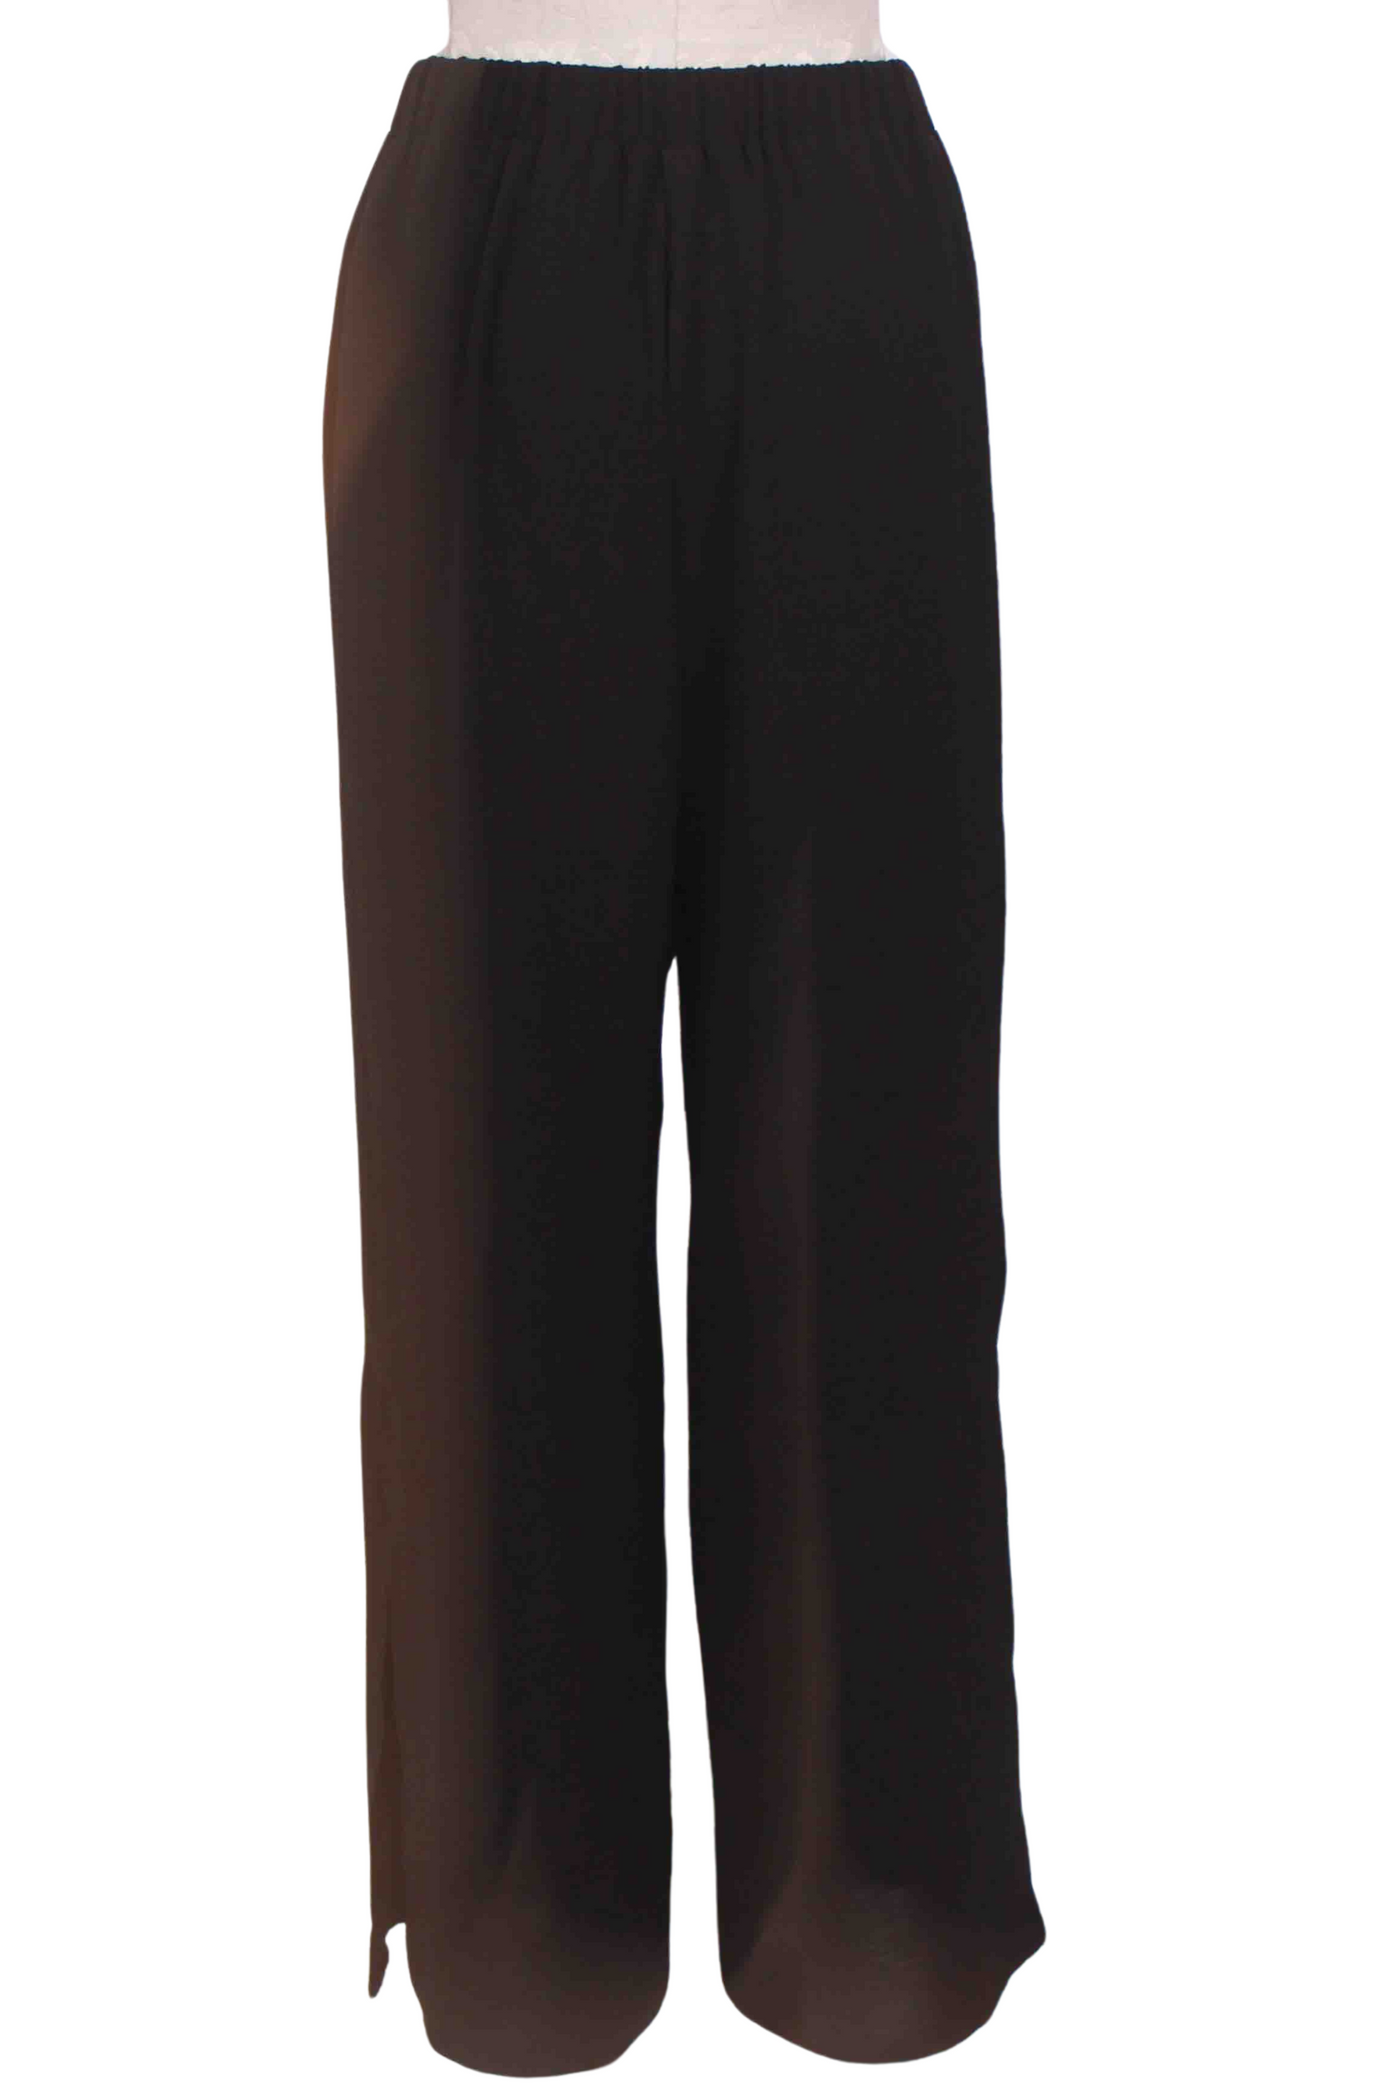 back view of Black Pull On Wide Leg Pant with Side Slits by Compli K